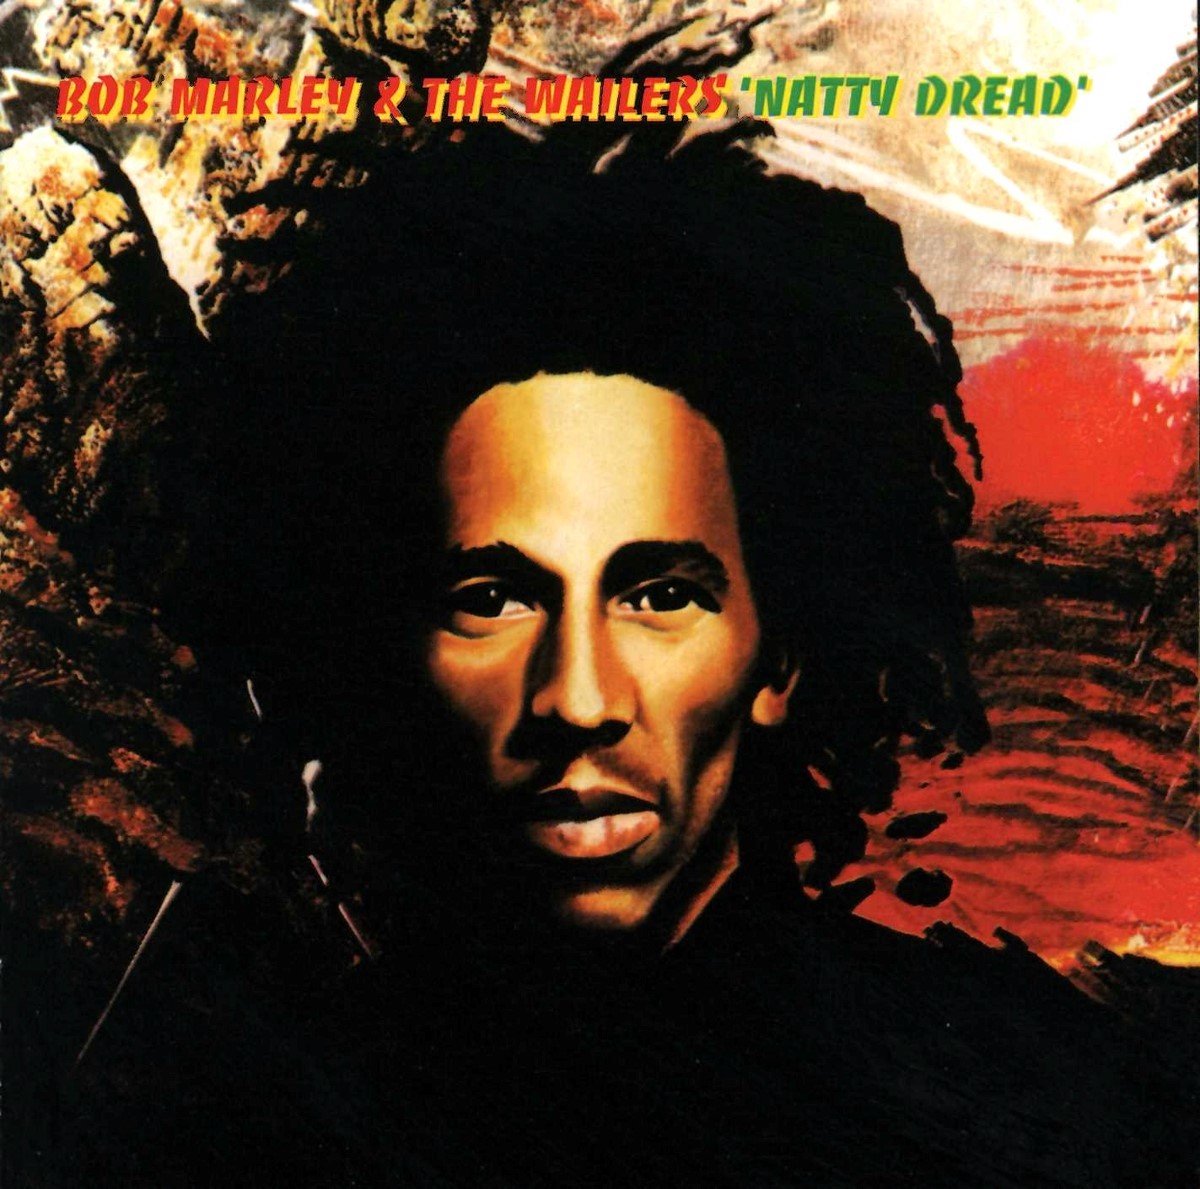 Bob Marley & The Wailers - Natty Dread (LP) (Limited Numbered Jamaican Reissue Edition) - Bob Marley & The Wailers